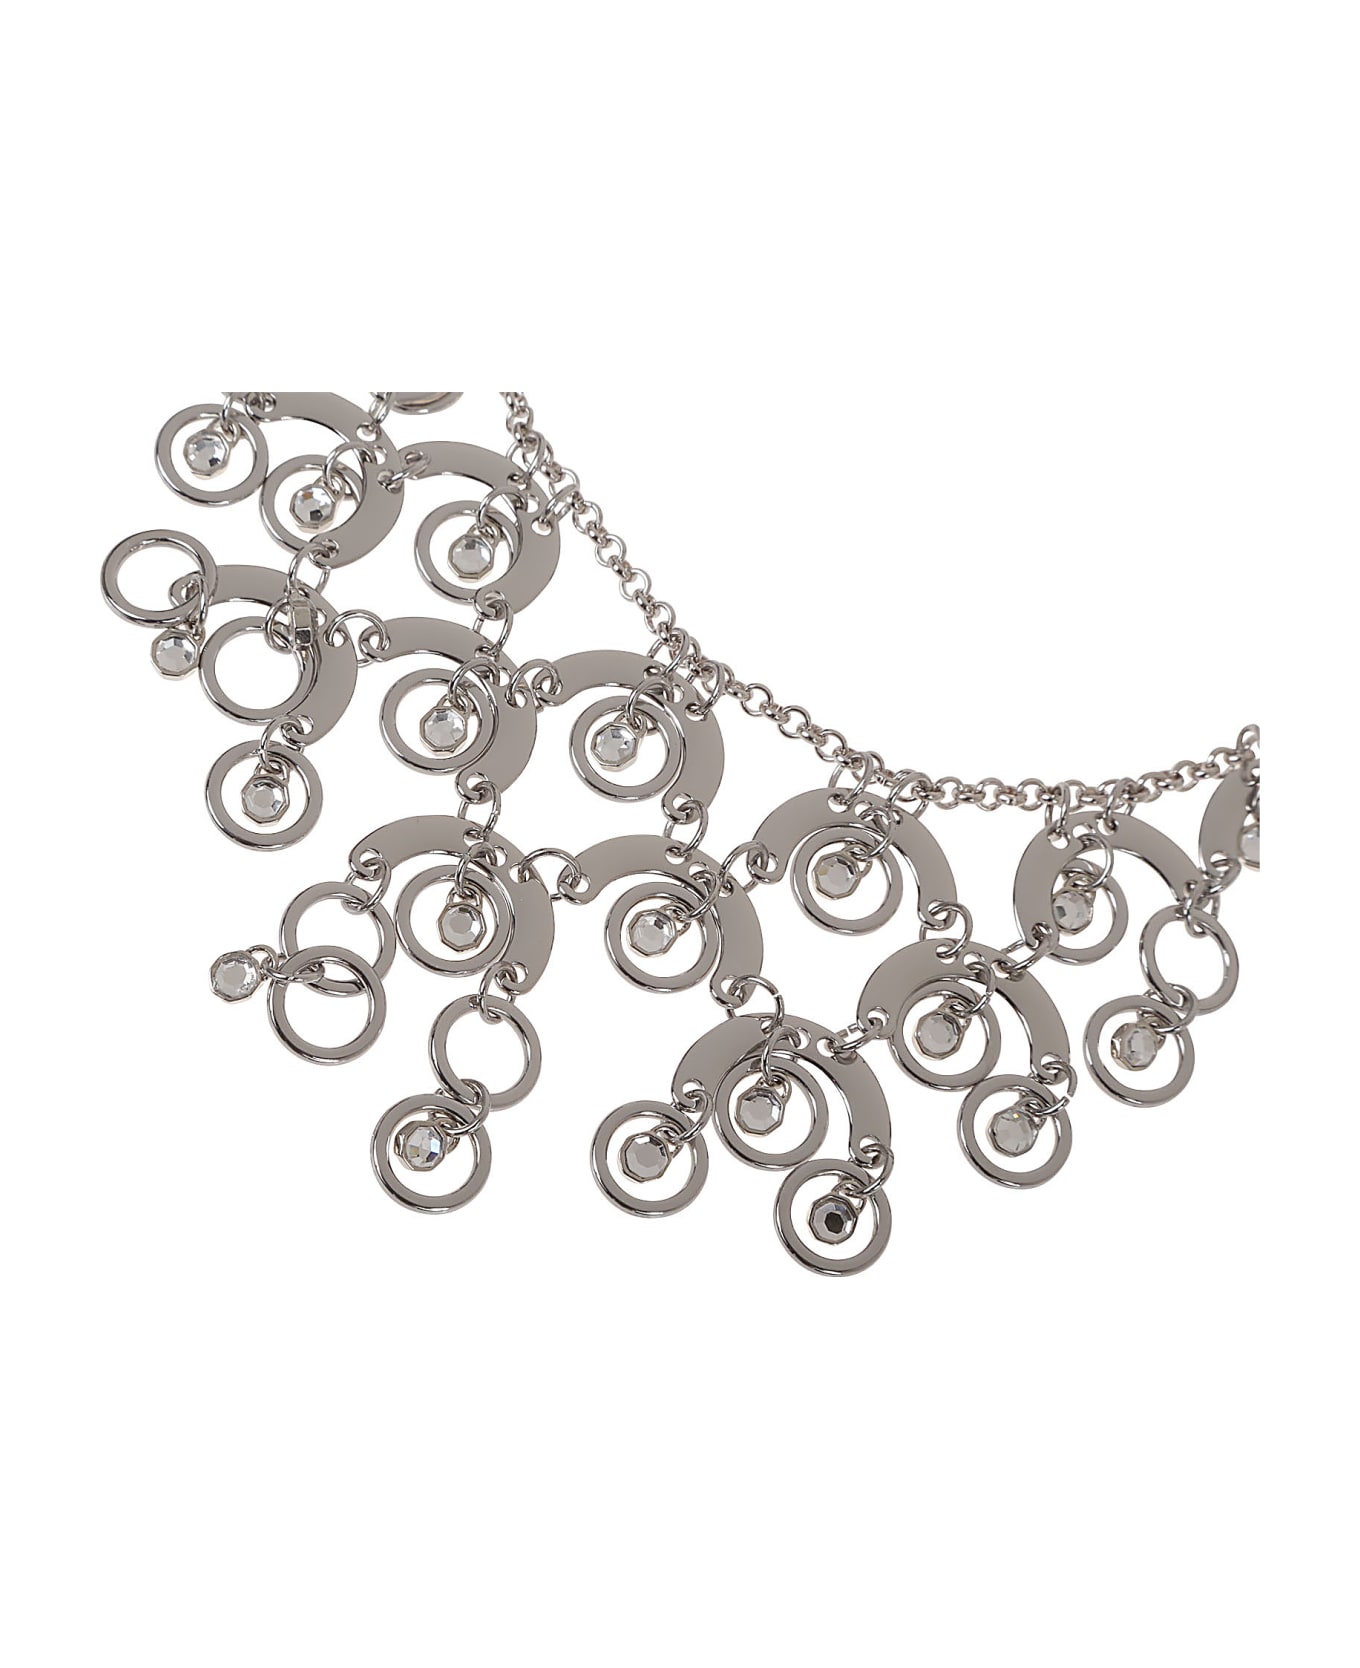 Paco Rabanne Sphere Necklace - Silver/crystal